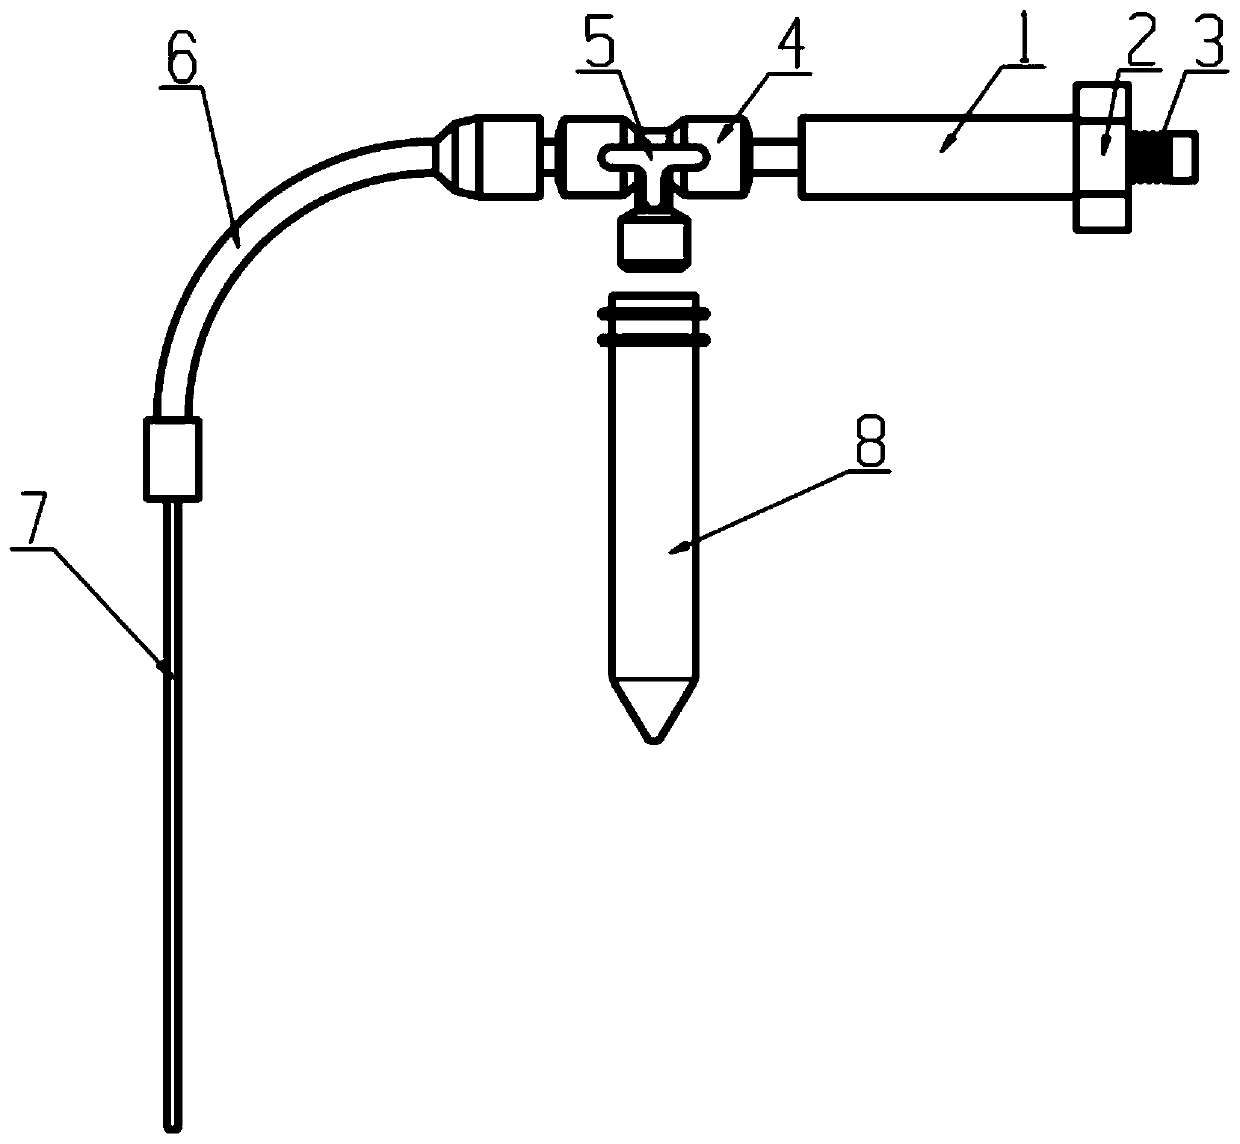 Liquid taking and separating device